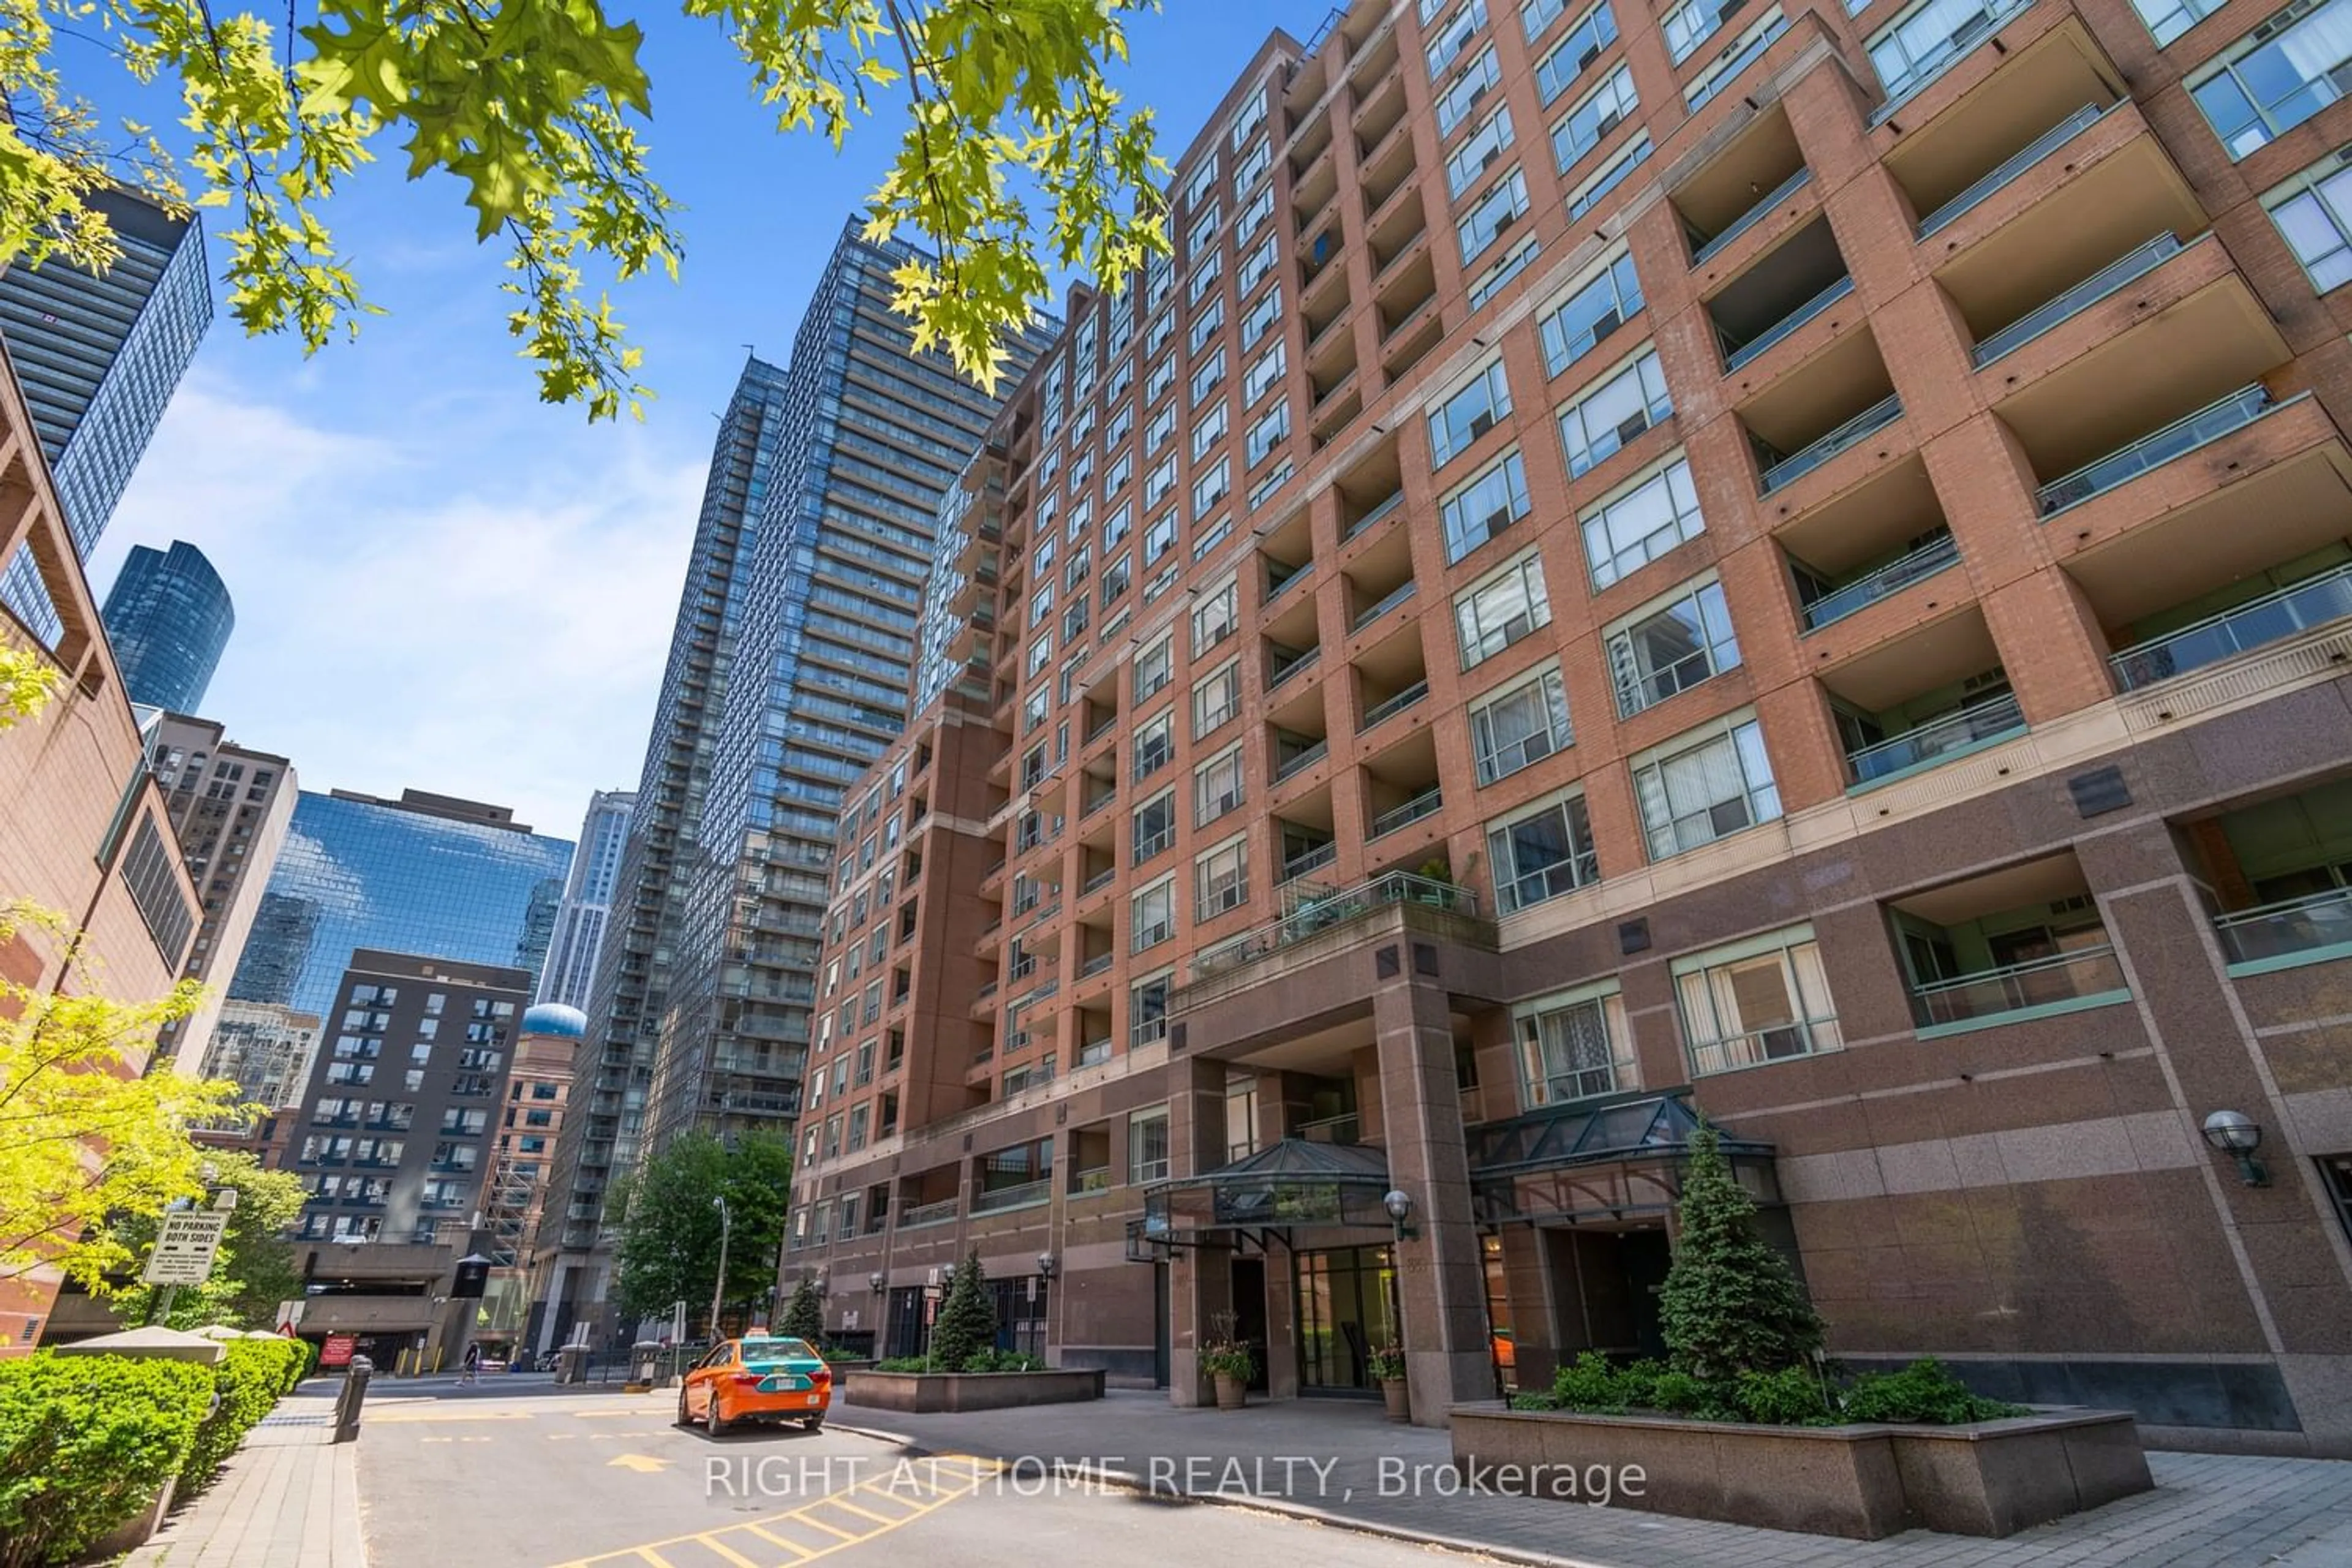 A pic from exterior of the house or condo for 889 Bay St #1008, Toronto Ontario M5S 3K5